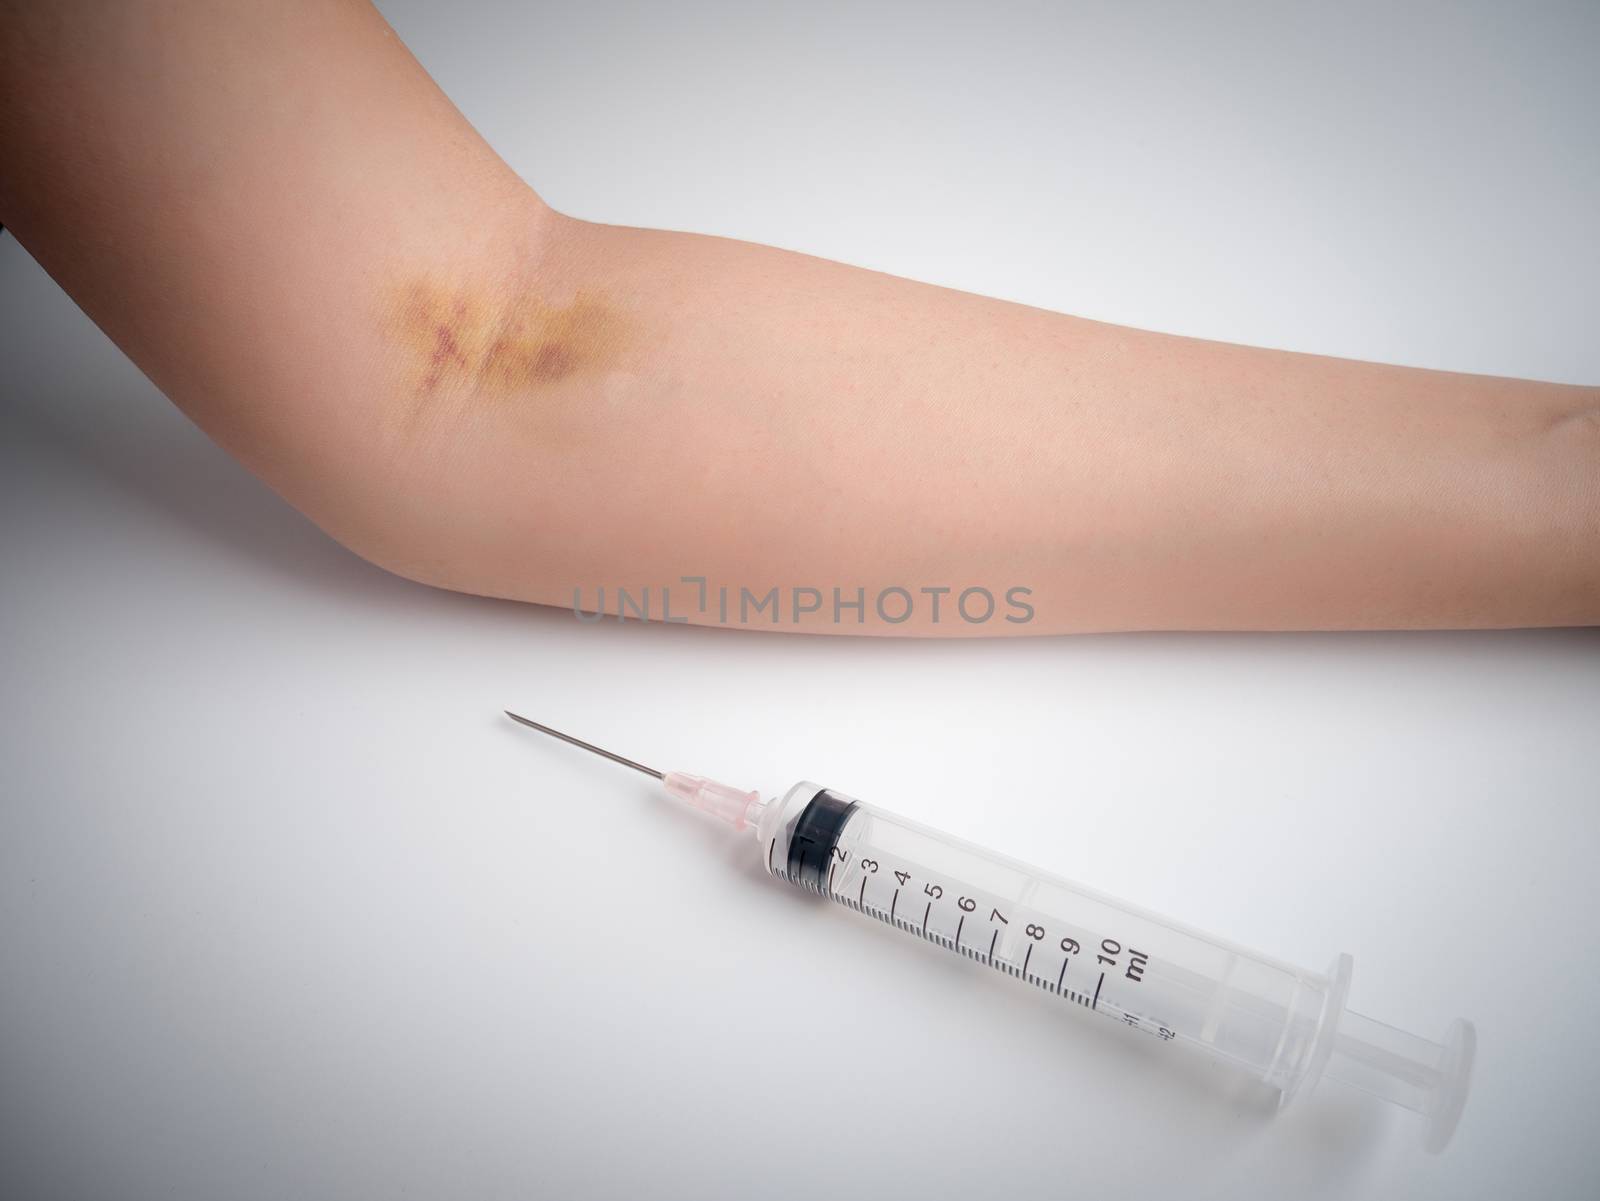 syringe , injection needle on the table and close up arm with bruise effect from frequent injection